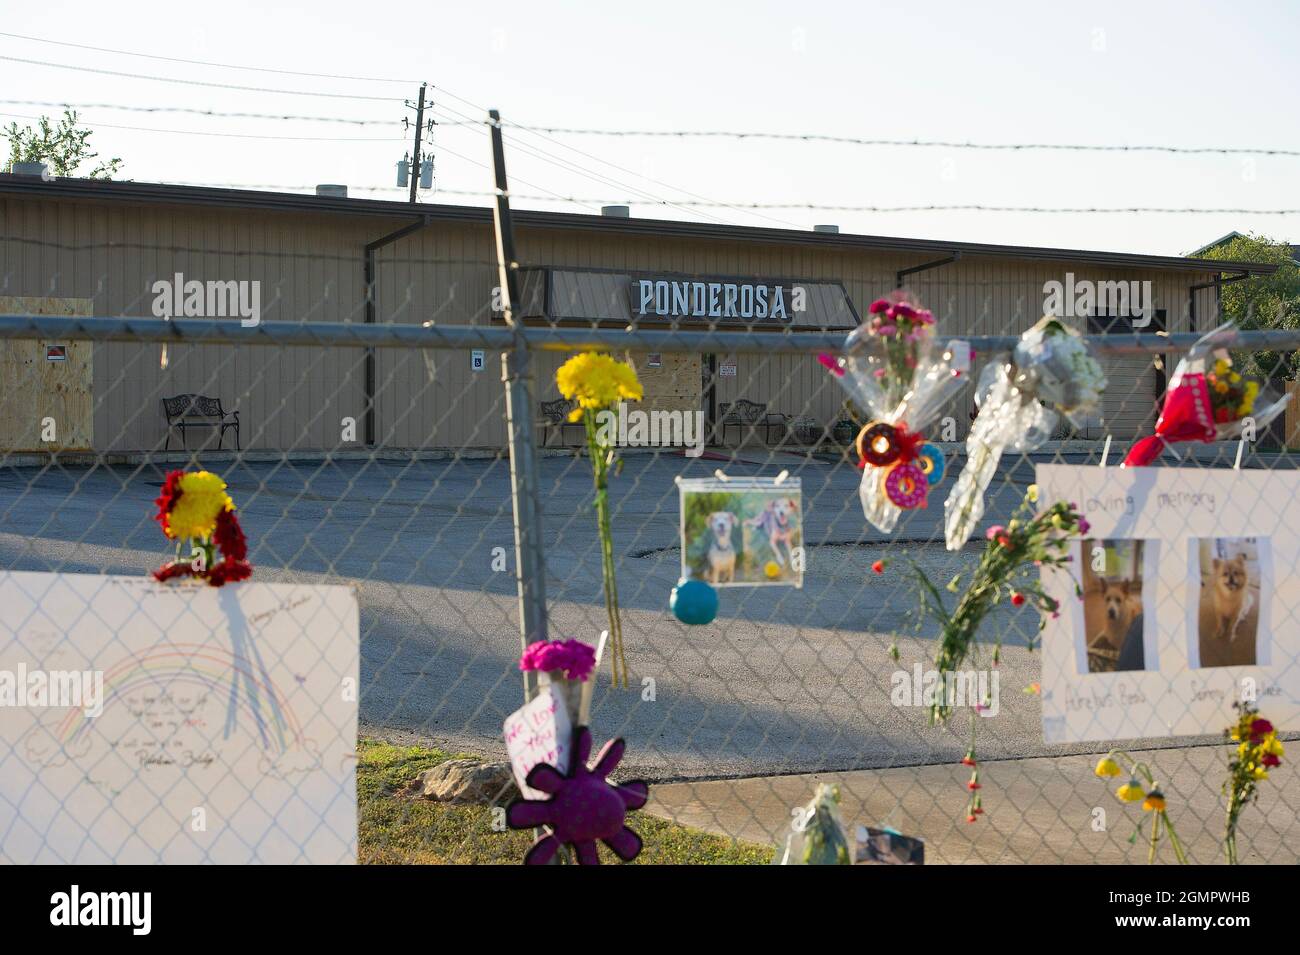 September 20, 2021: A Memorial grows after a fire engulfed Ponderosa Pet Resort Saturday evening resulted in the deaths of 75 dogs at the Resort. Georgetown, Texas. Mario Cantu/CSM Stock Photo